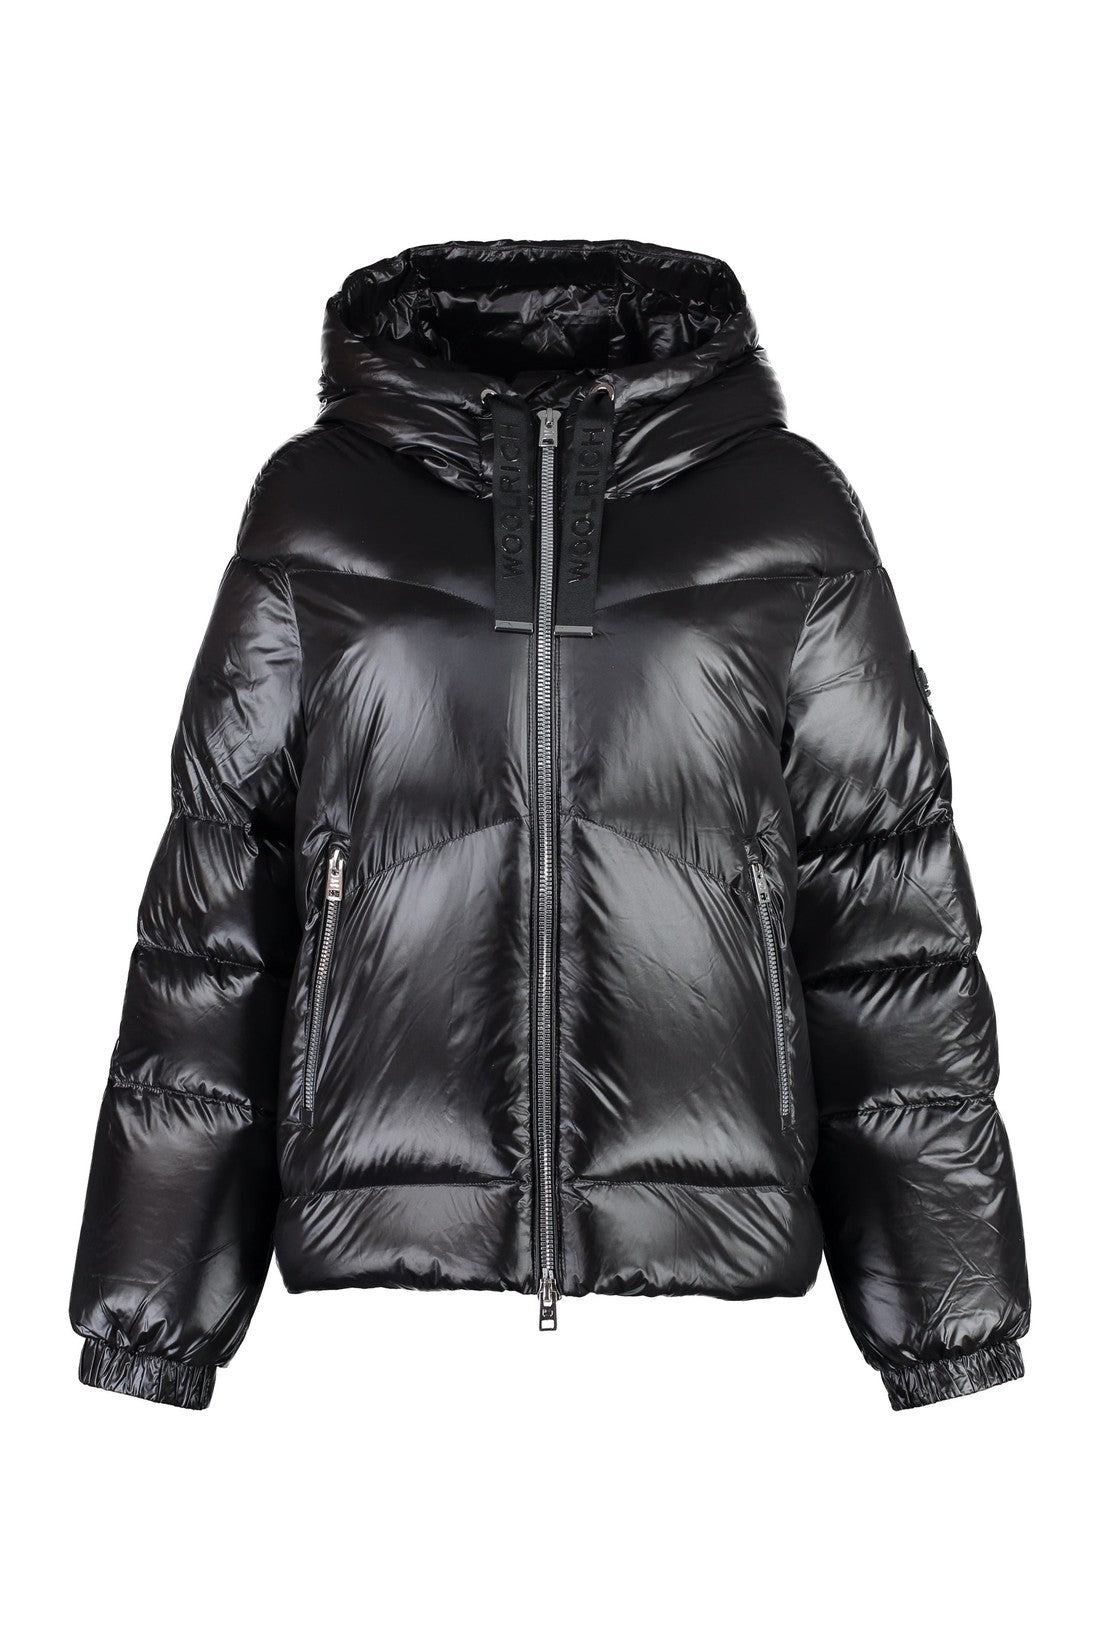 Woolrich-OUTLET-SALE-Aliquippa hooded nylon down jacket-ARCHIVIST